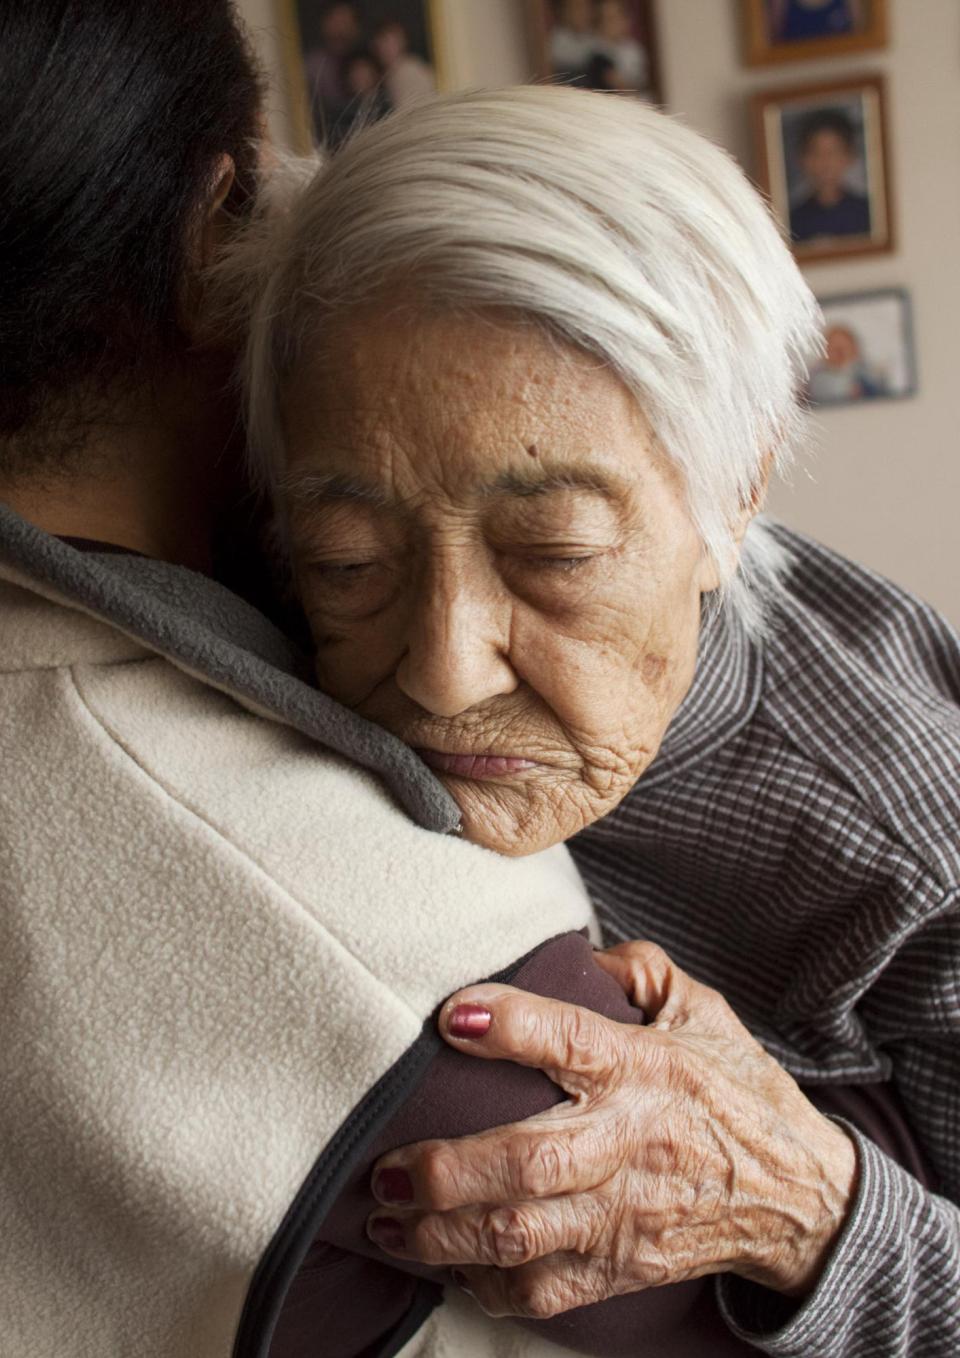 A still from the New Day film The Caretaker + The Mayor. An elderly woman with white hair hugs a person who is facing away from the camera. Her eyes are closed and her expression is vulnerable as she holds the person close. Behind them is a wall full of framed photos of a young child.